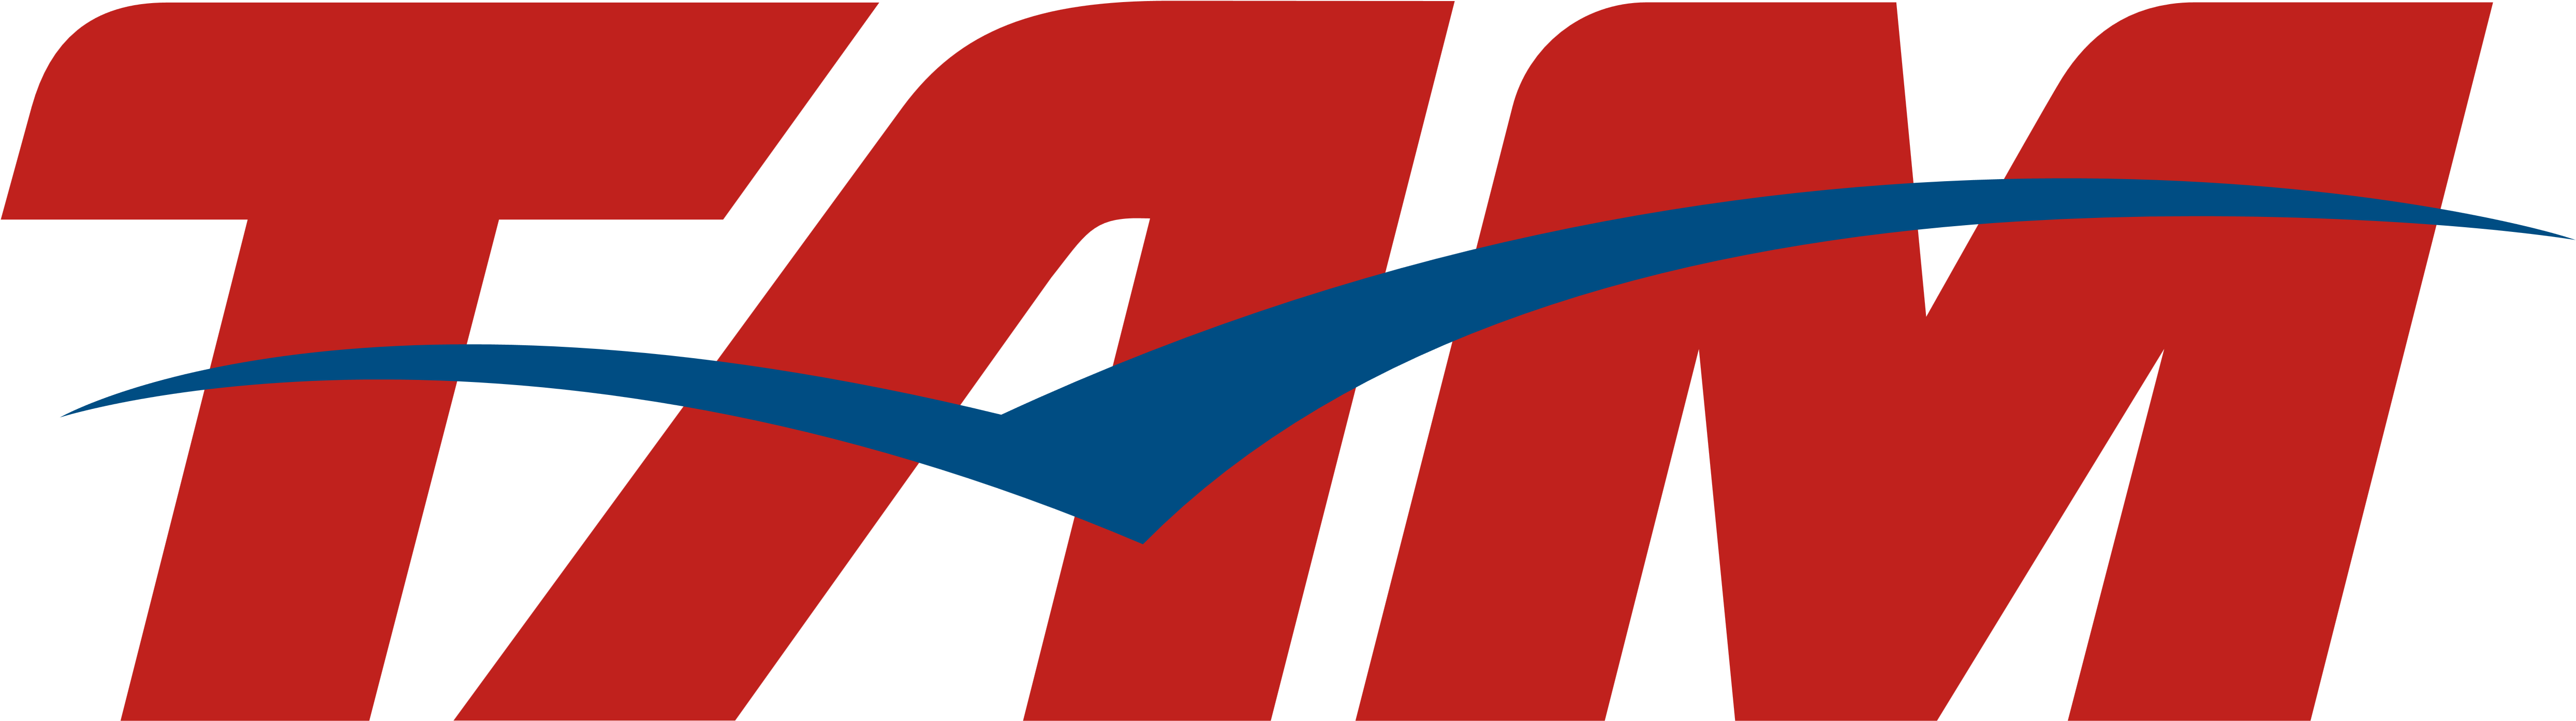 Lan And Tam Airlines, Tam Linhas Aéreas - Tam Airlines Logo Png (5000x1400), Png Download